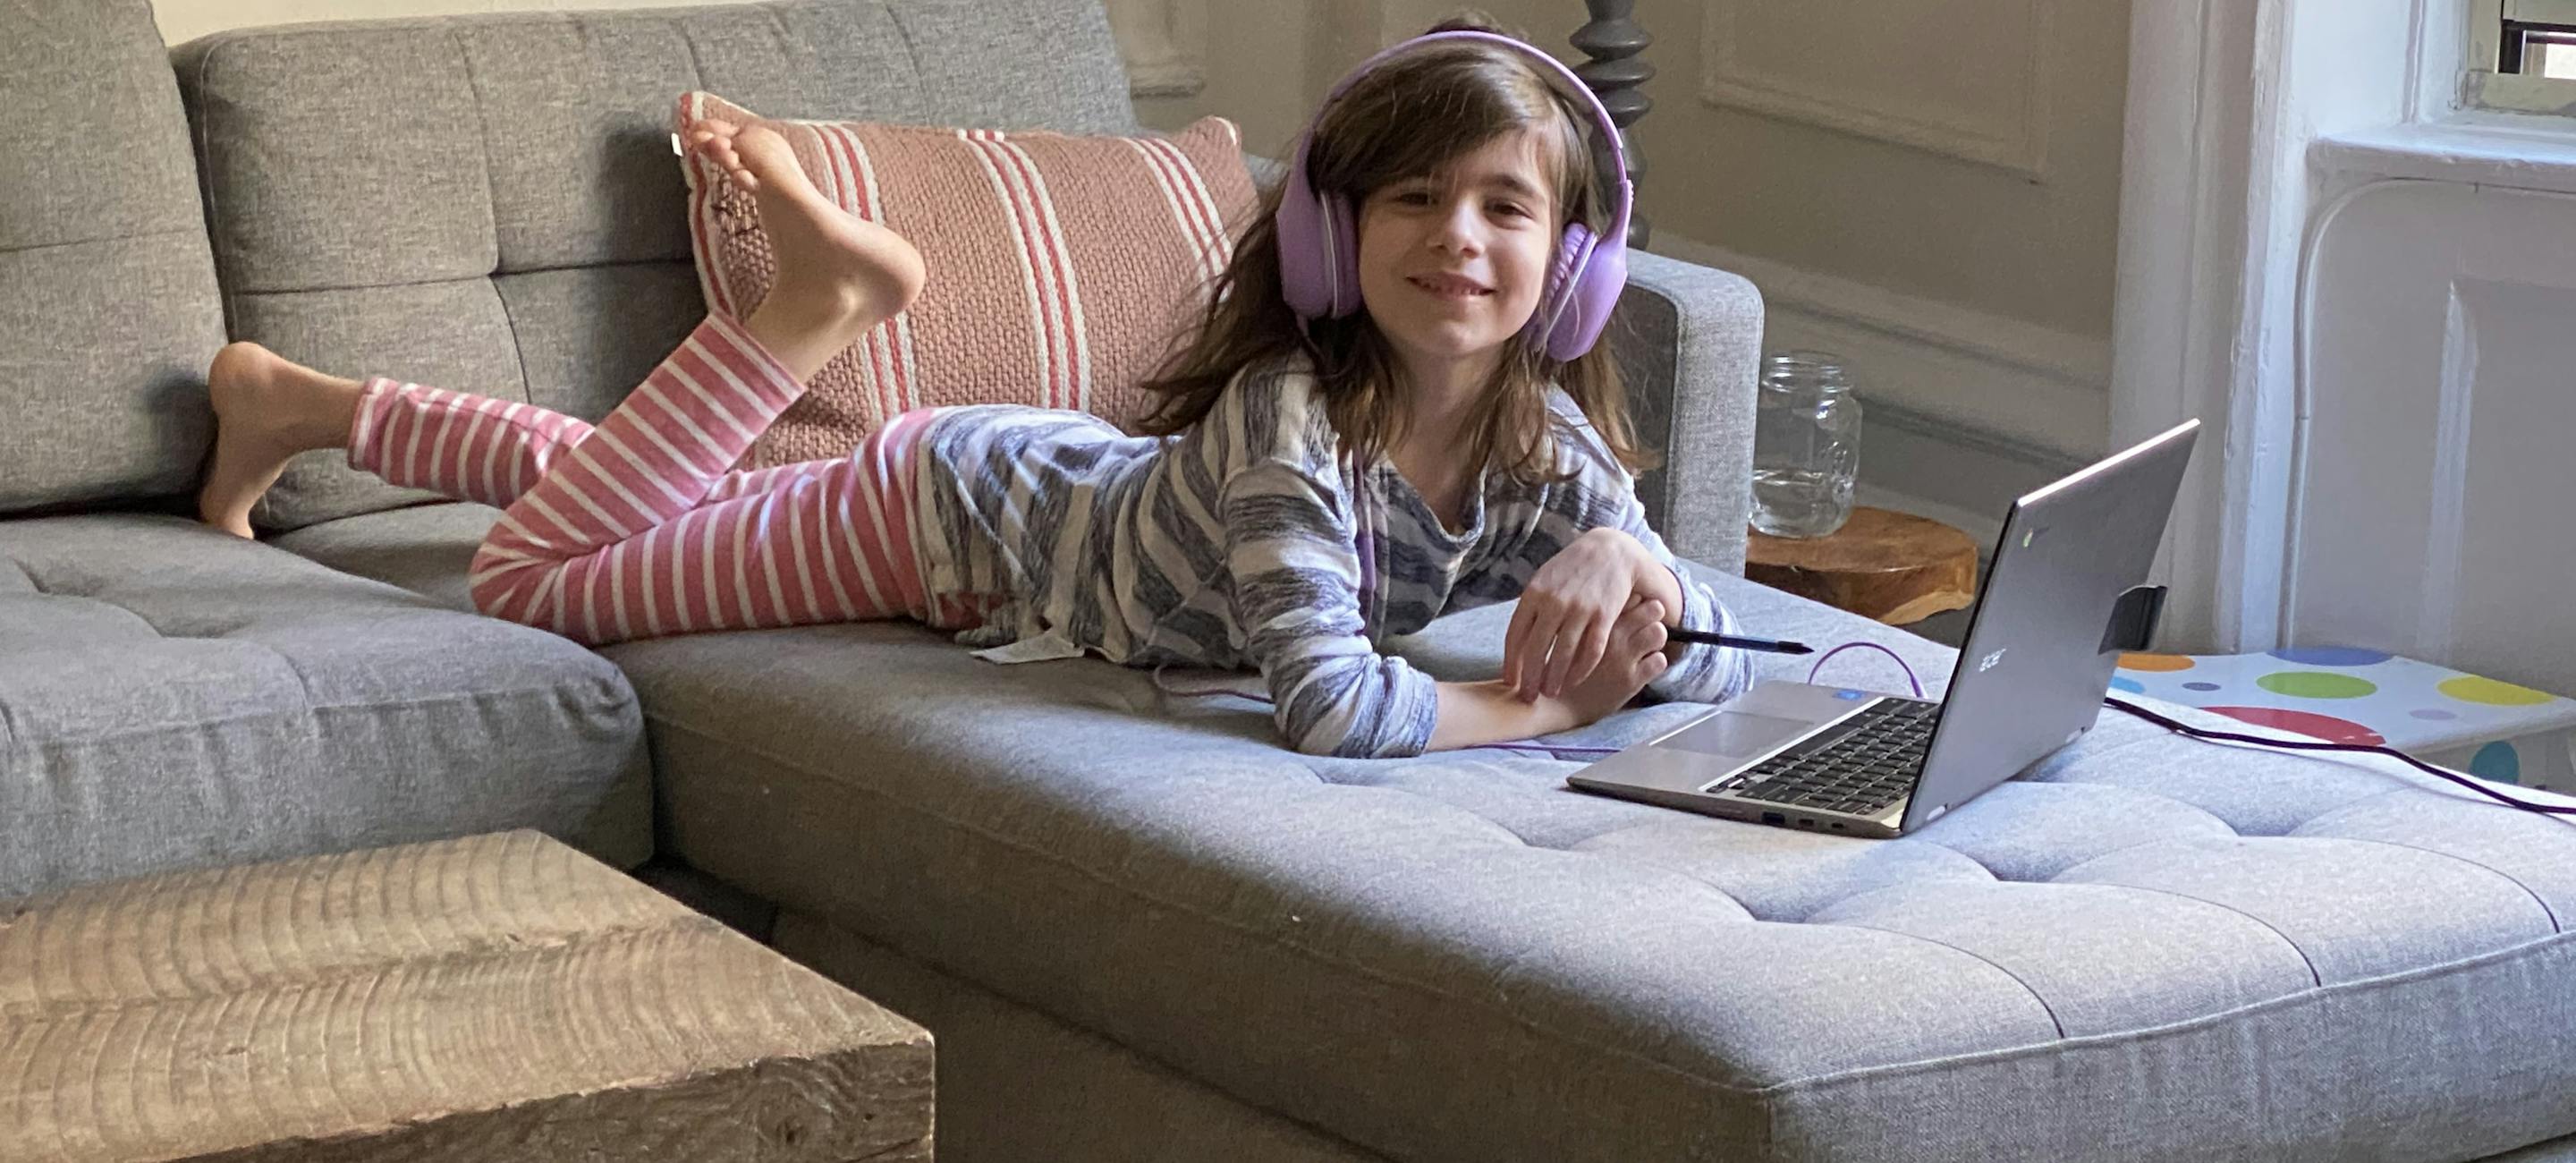 young white girl wearing headphones, laying on a couch and interacting with a computer